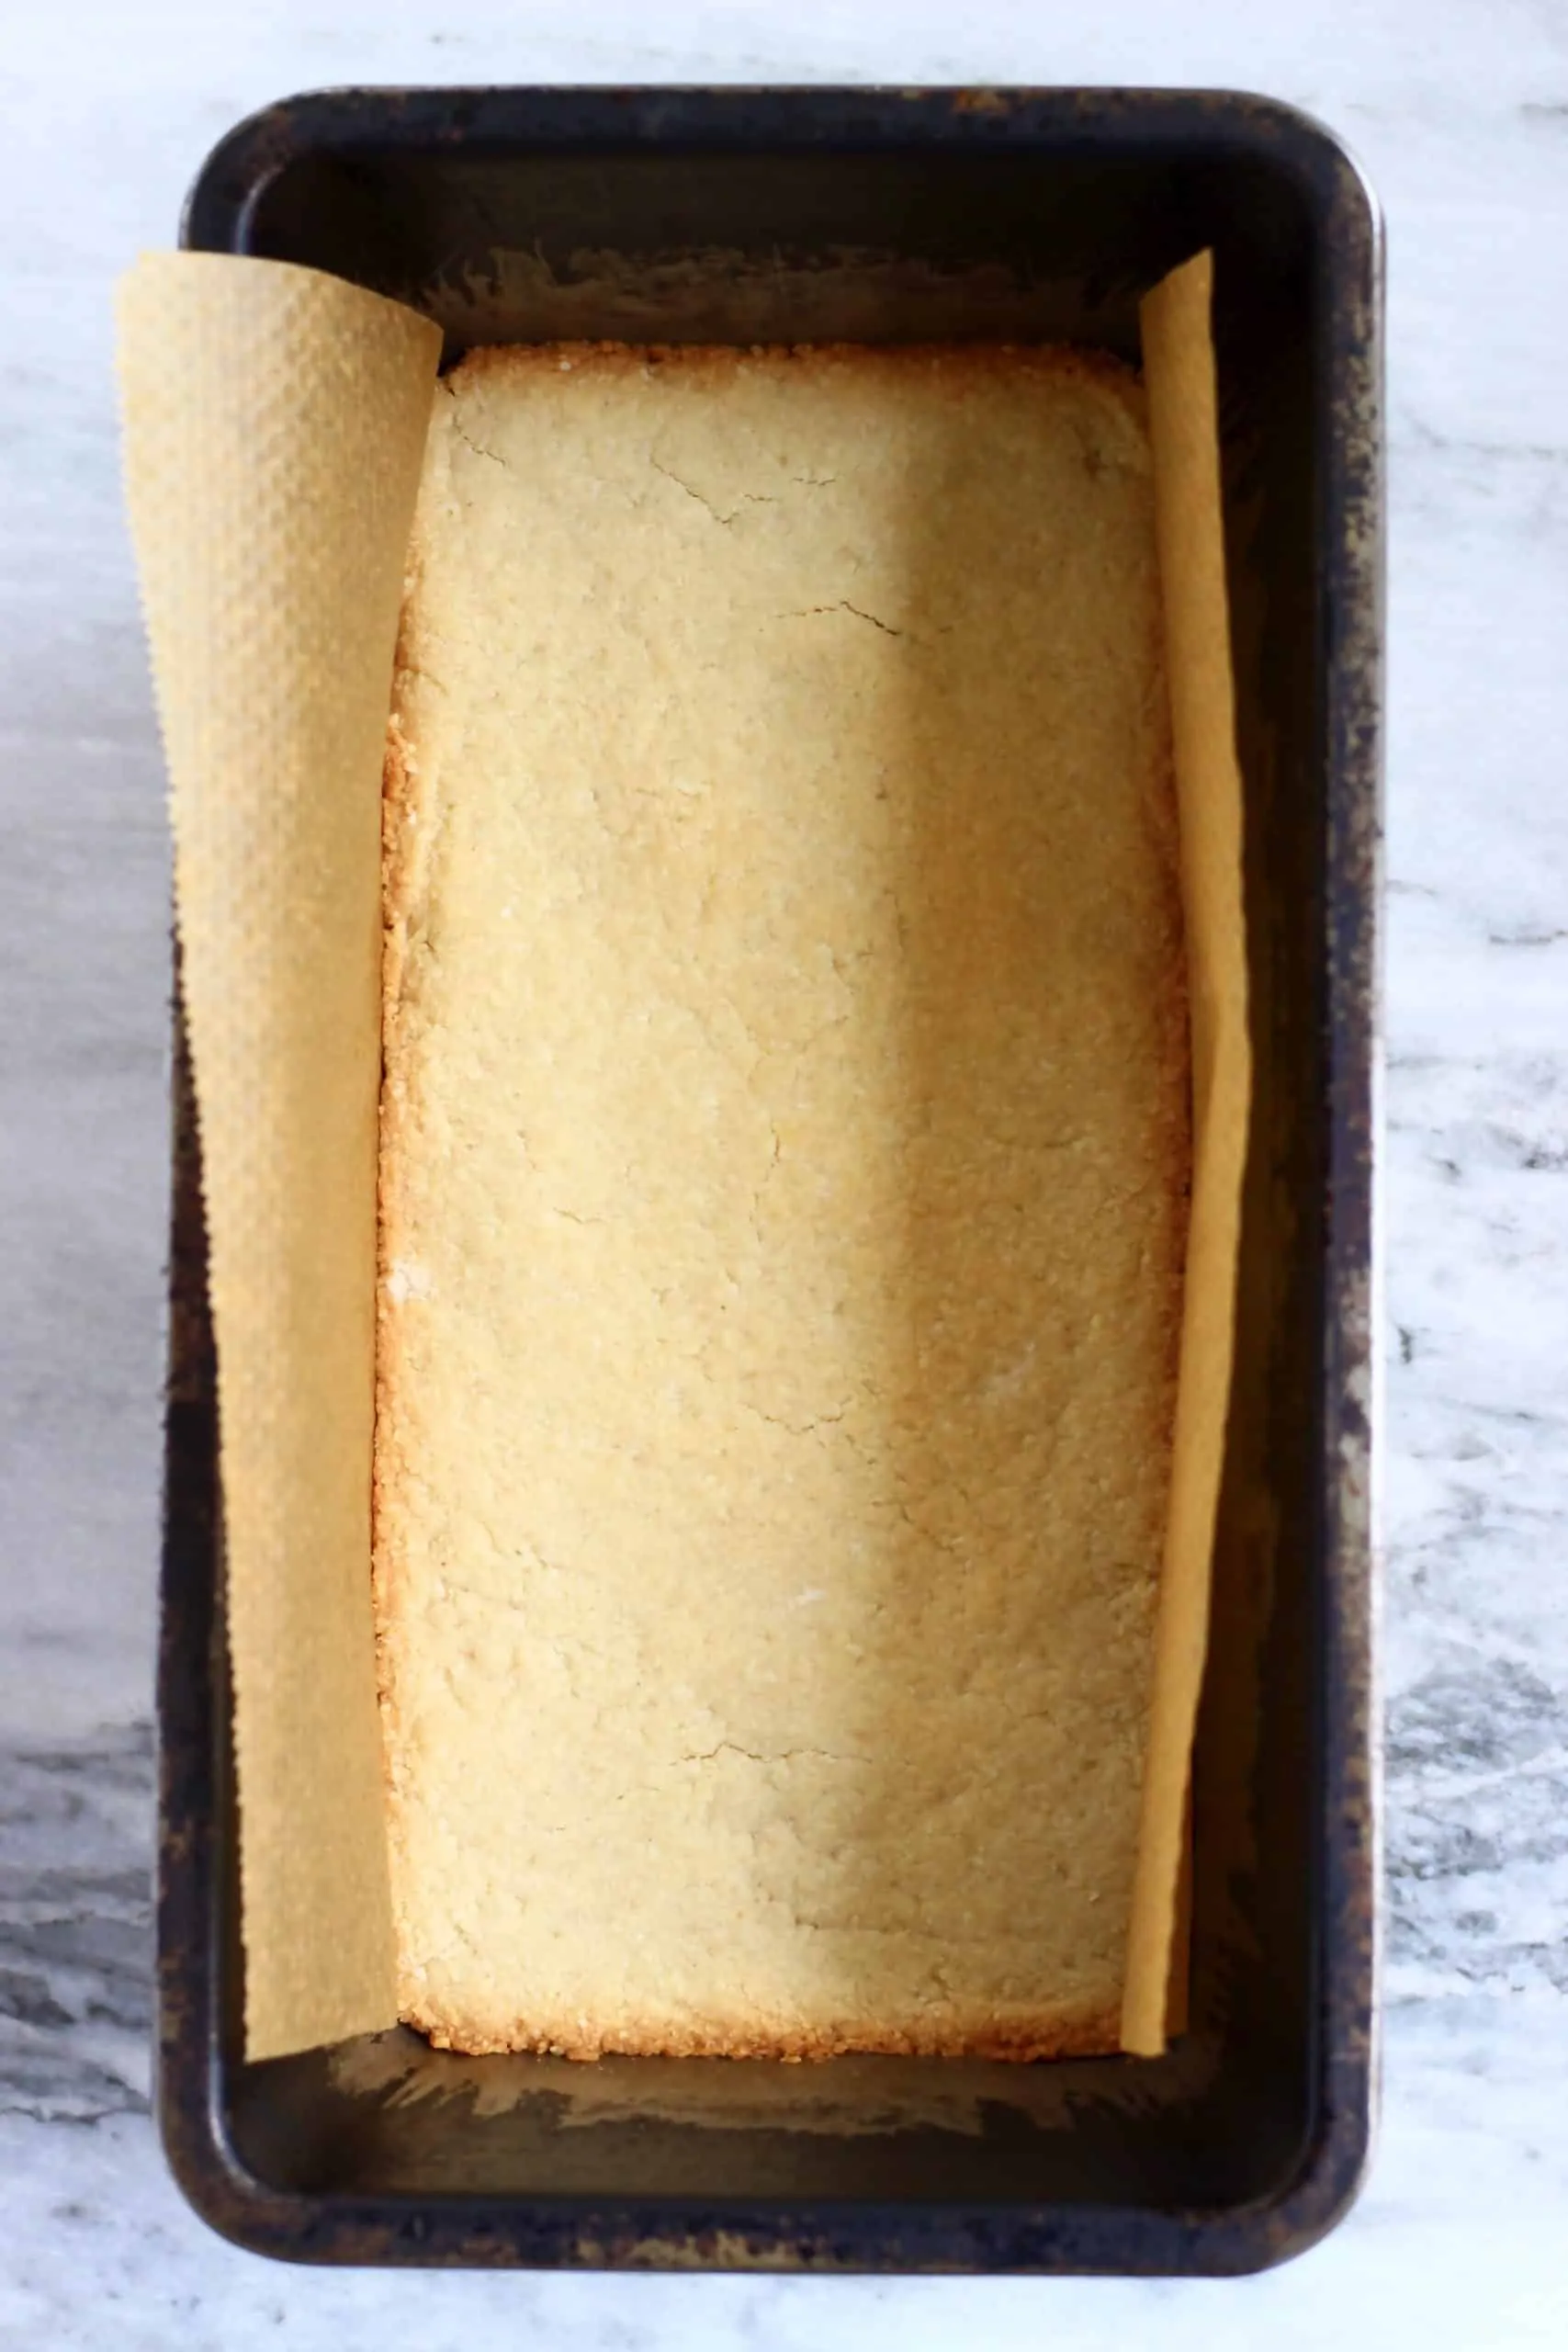 Baked shortbread cookie base in a loaf tin lined with baking paper